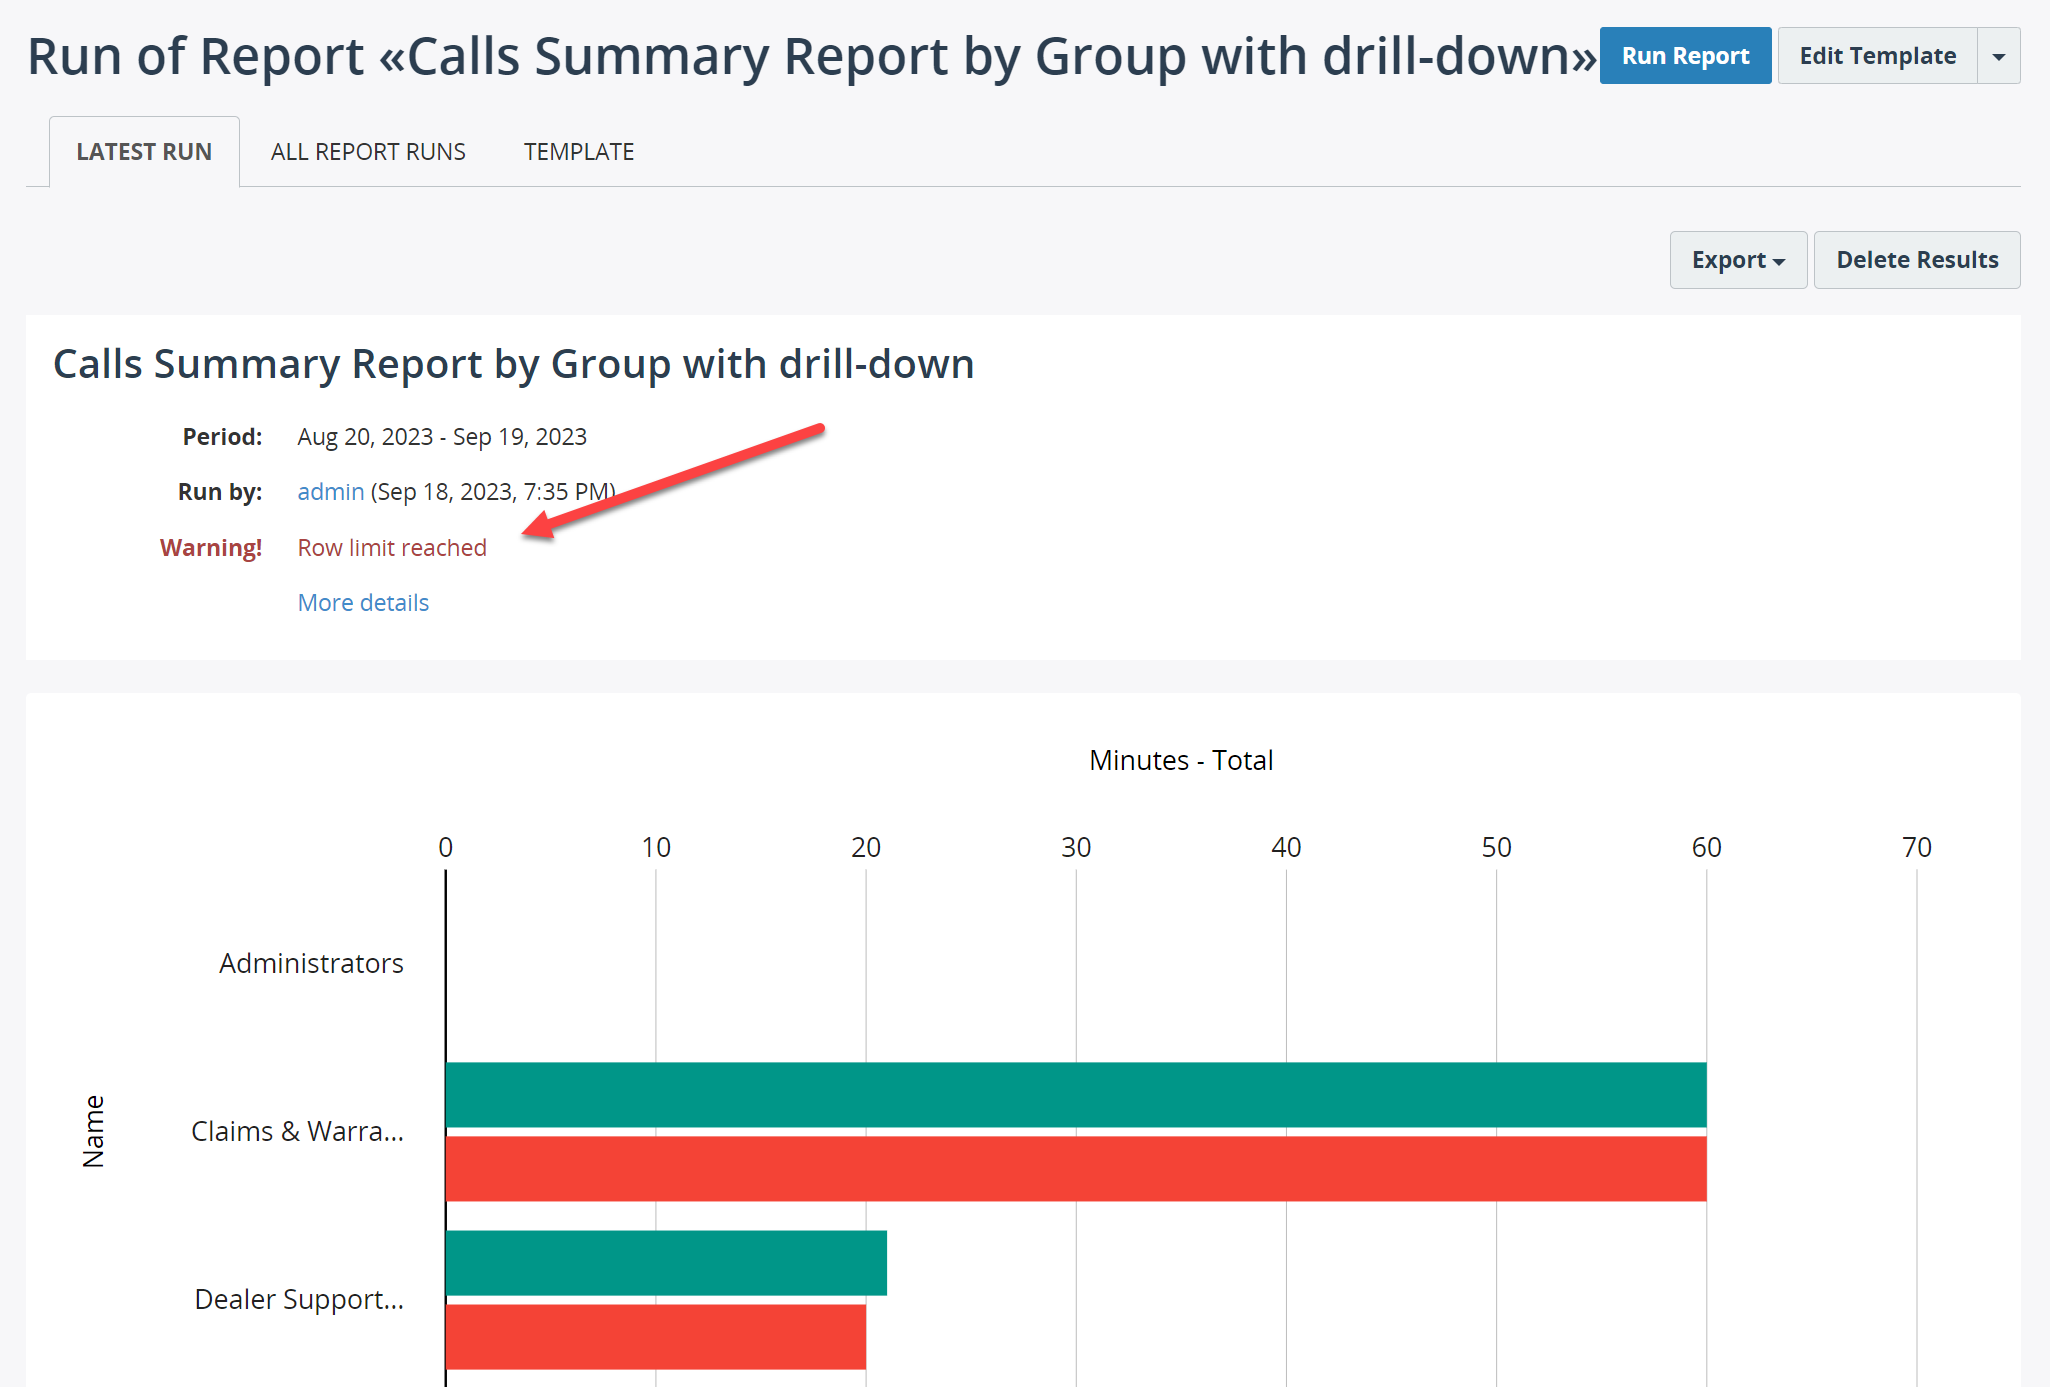 Call Summary with Drill-Down Row Limit Reached